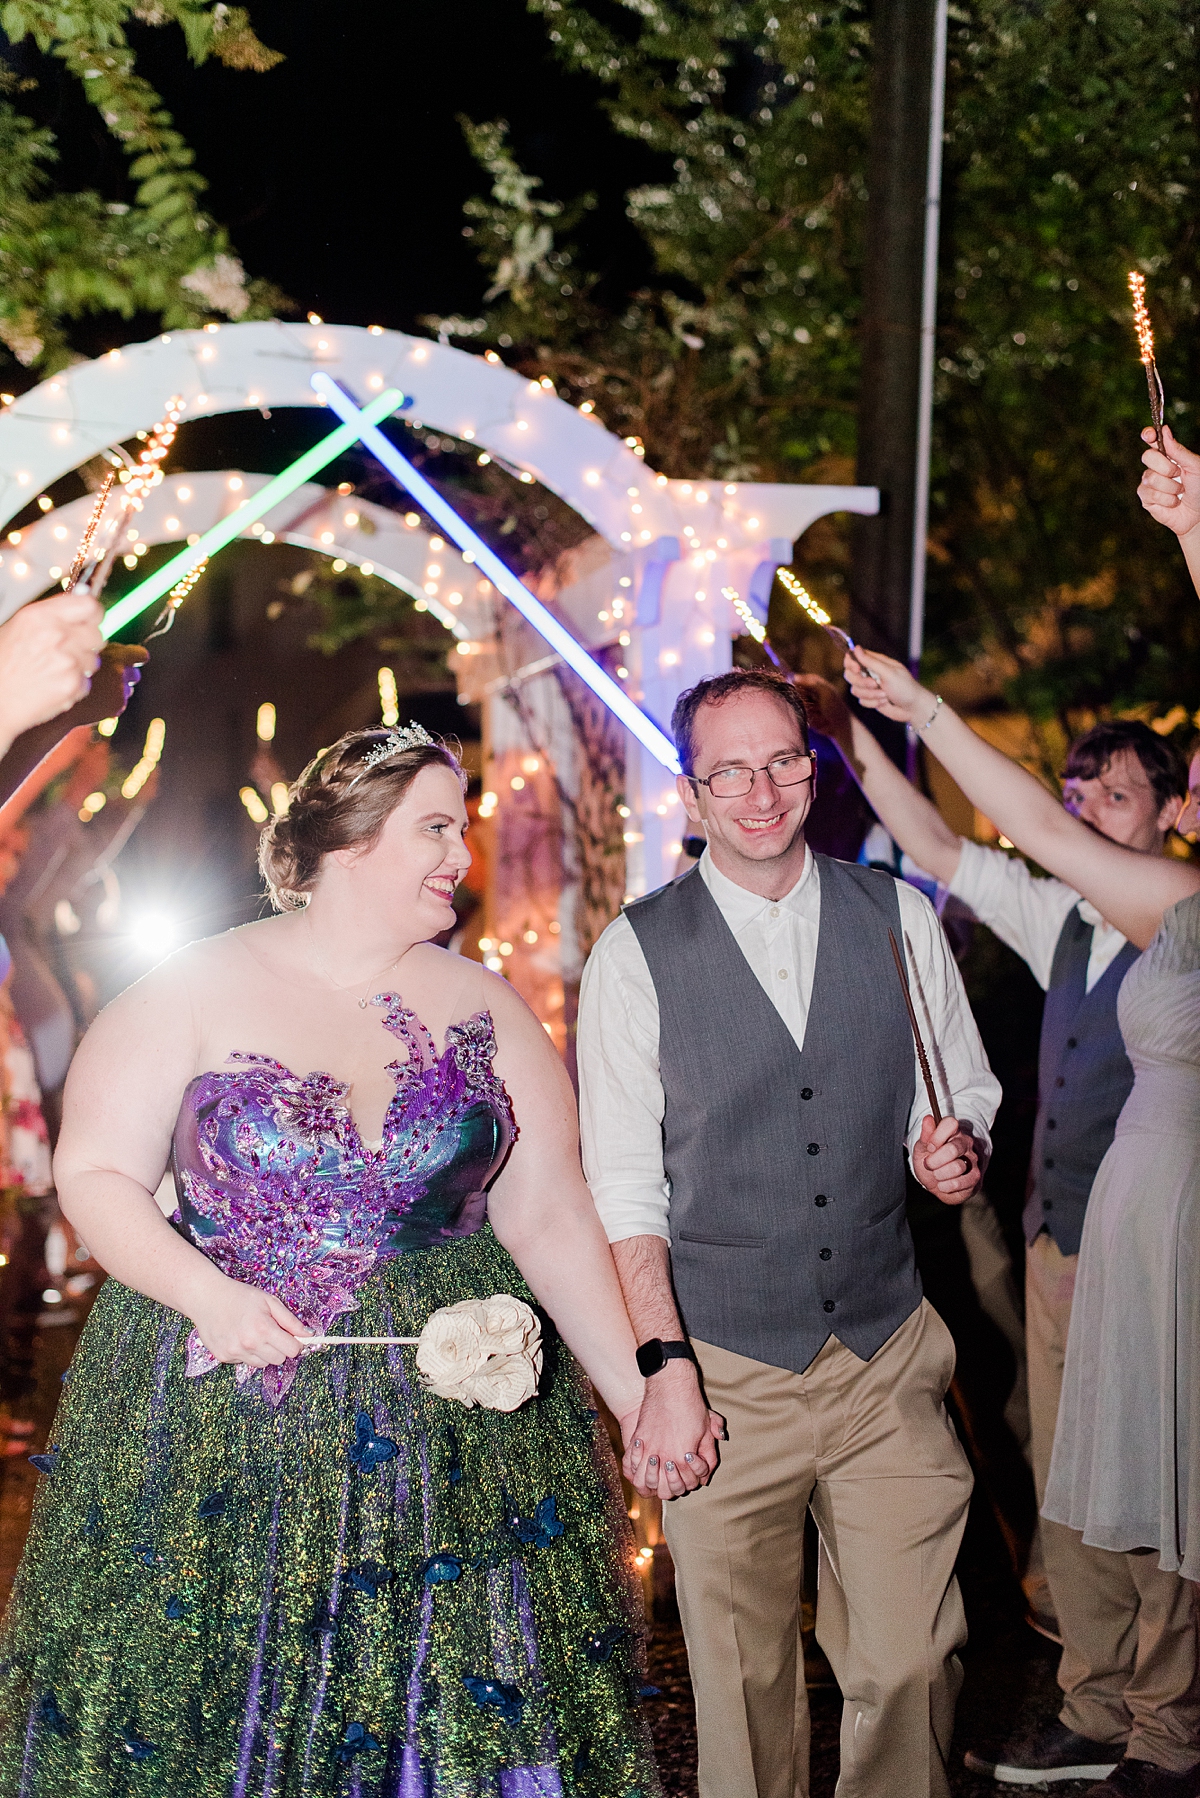 Harry Potter and Star Wars Themed Exit at Virginia Cliffe Inn Wedding. Wedding Photography by Richmond Wedding Photographer Kailey Brianne Photography. 